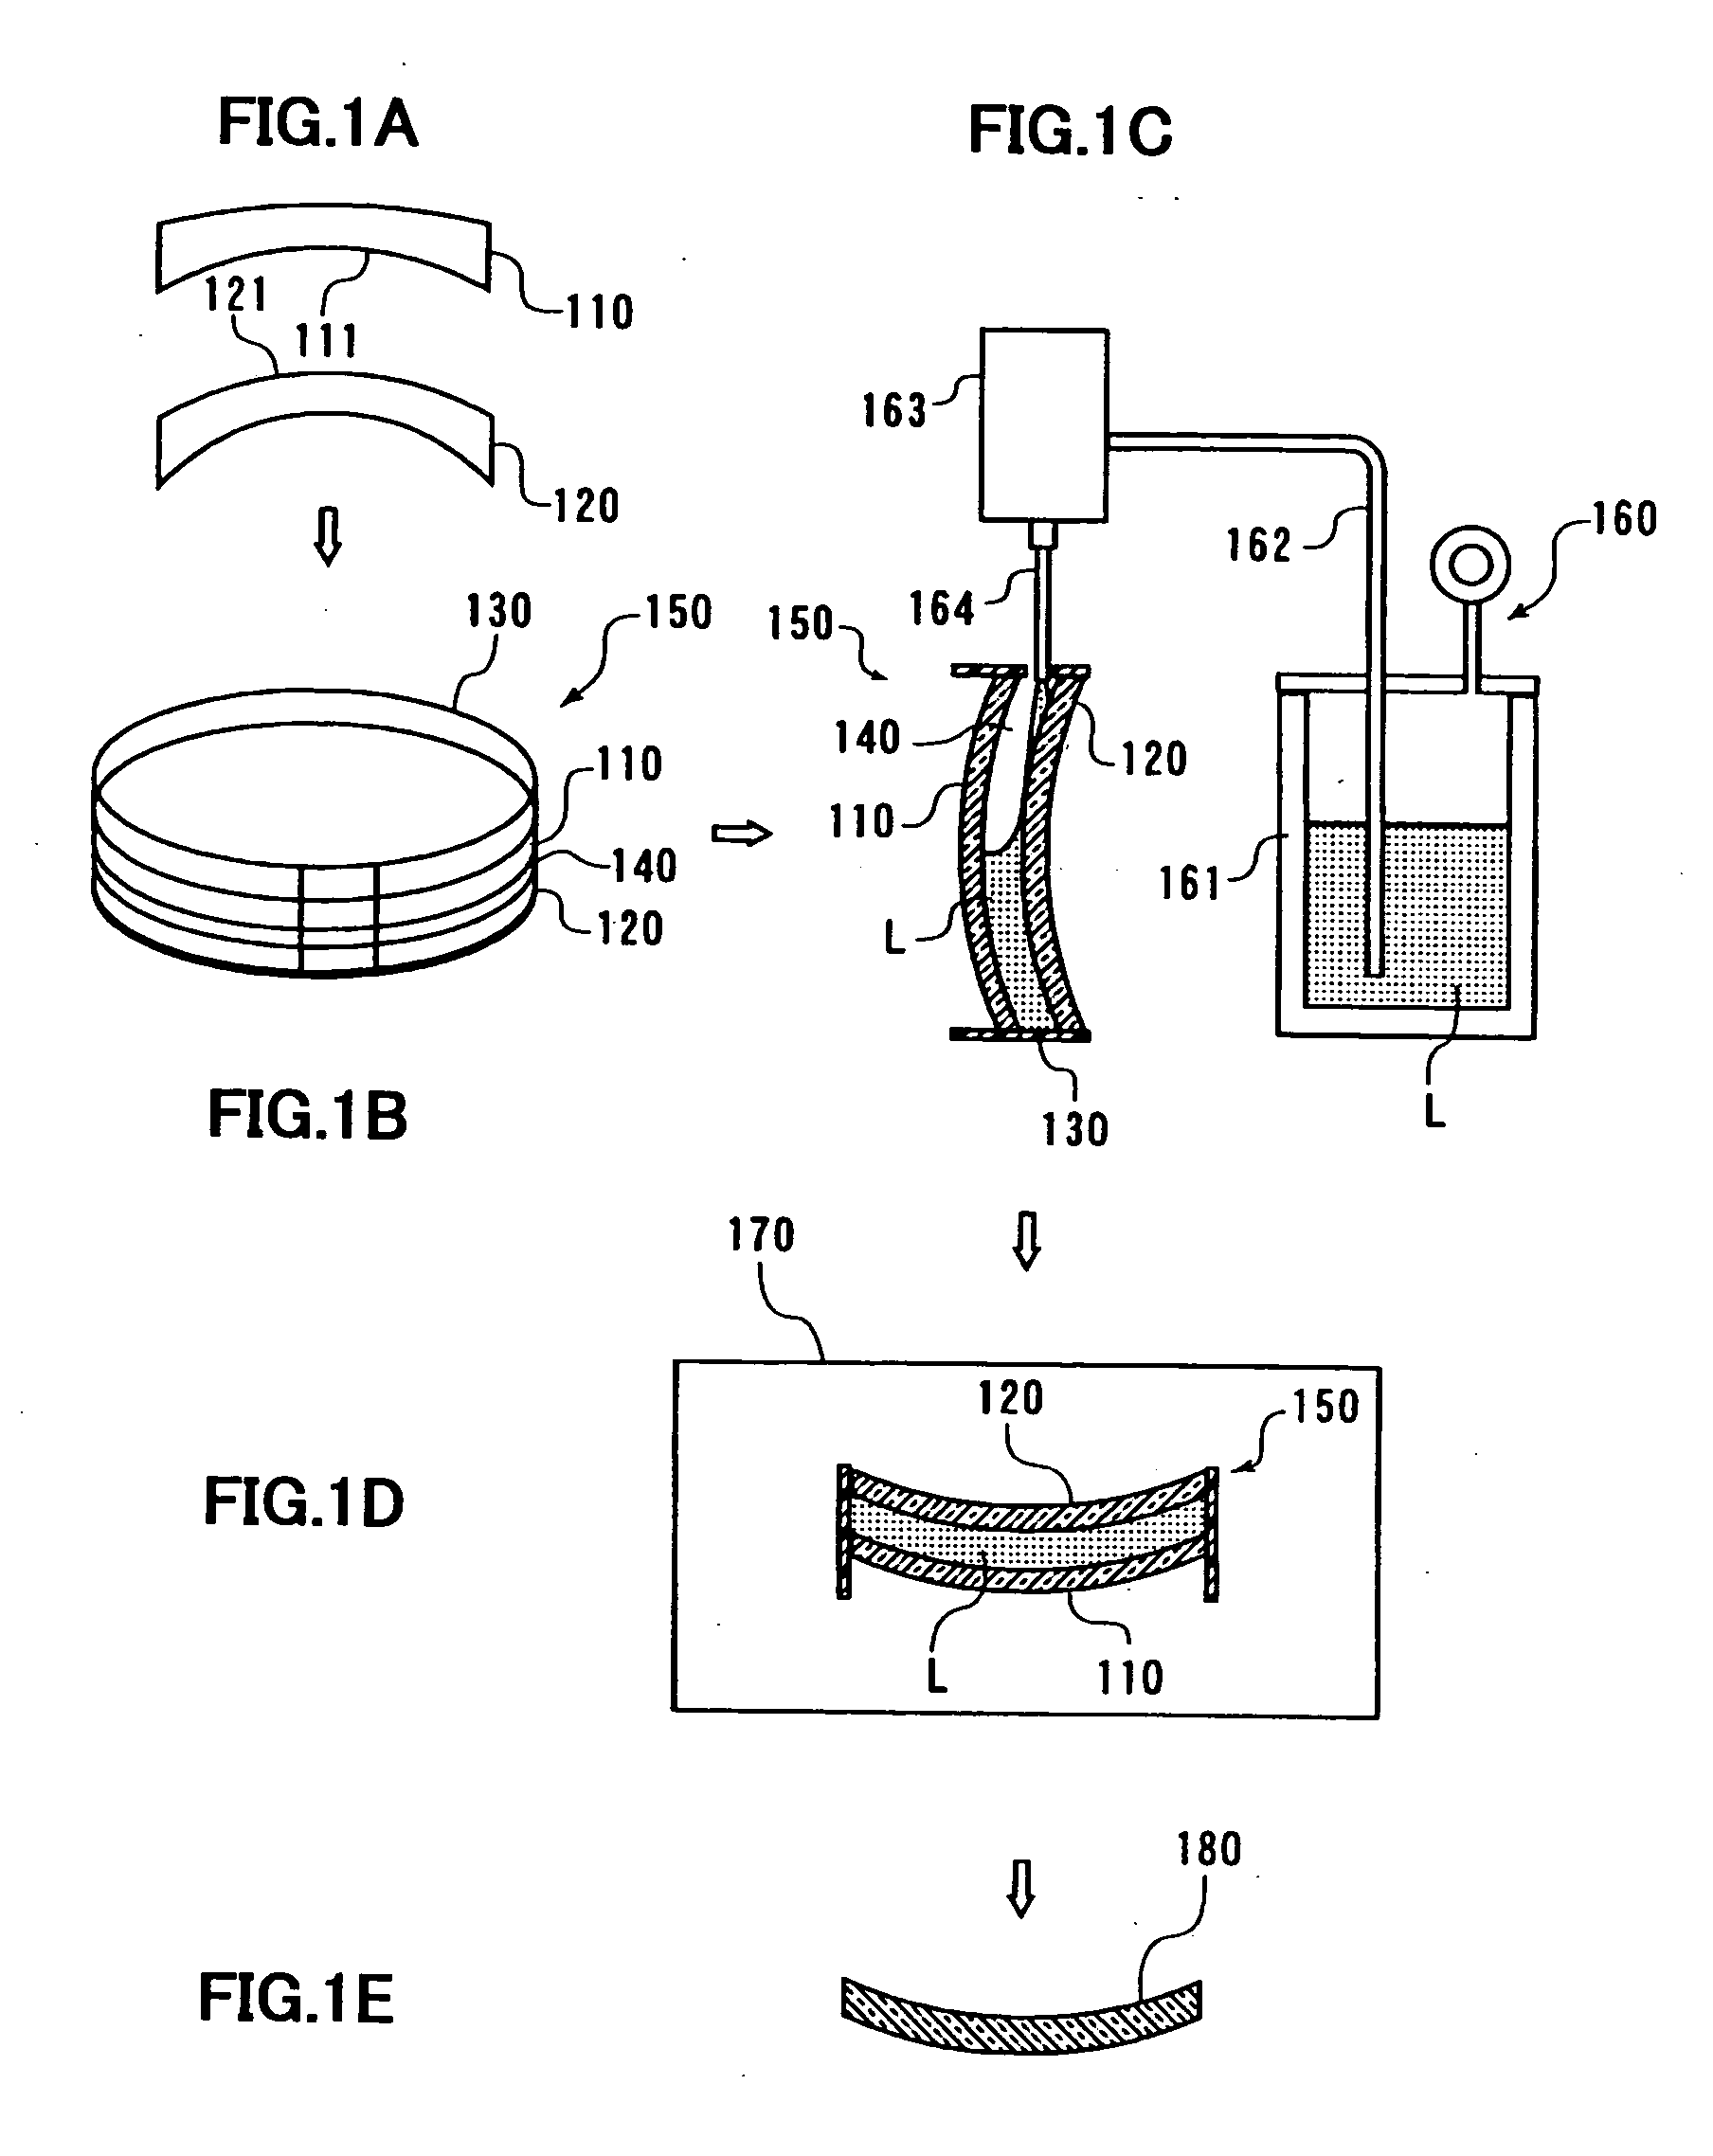 Producing method for plastic lens and raw material storage/supply apparatus